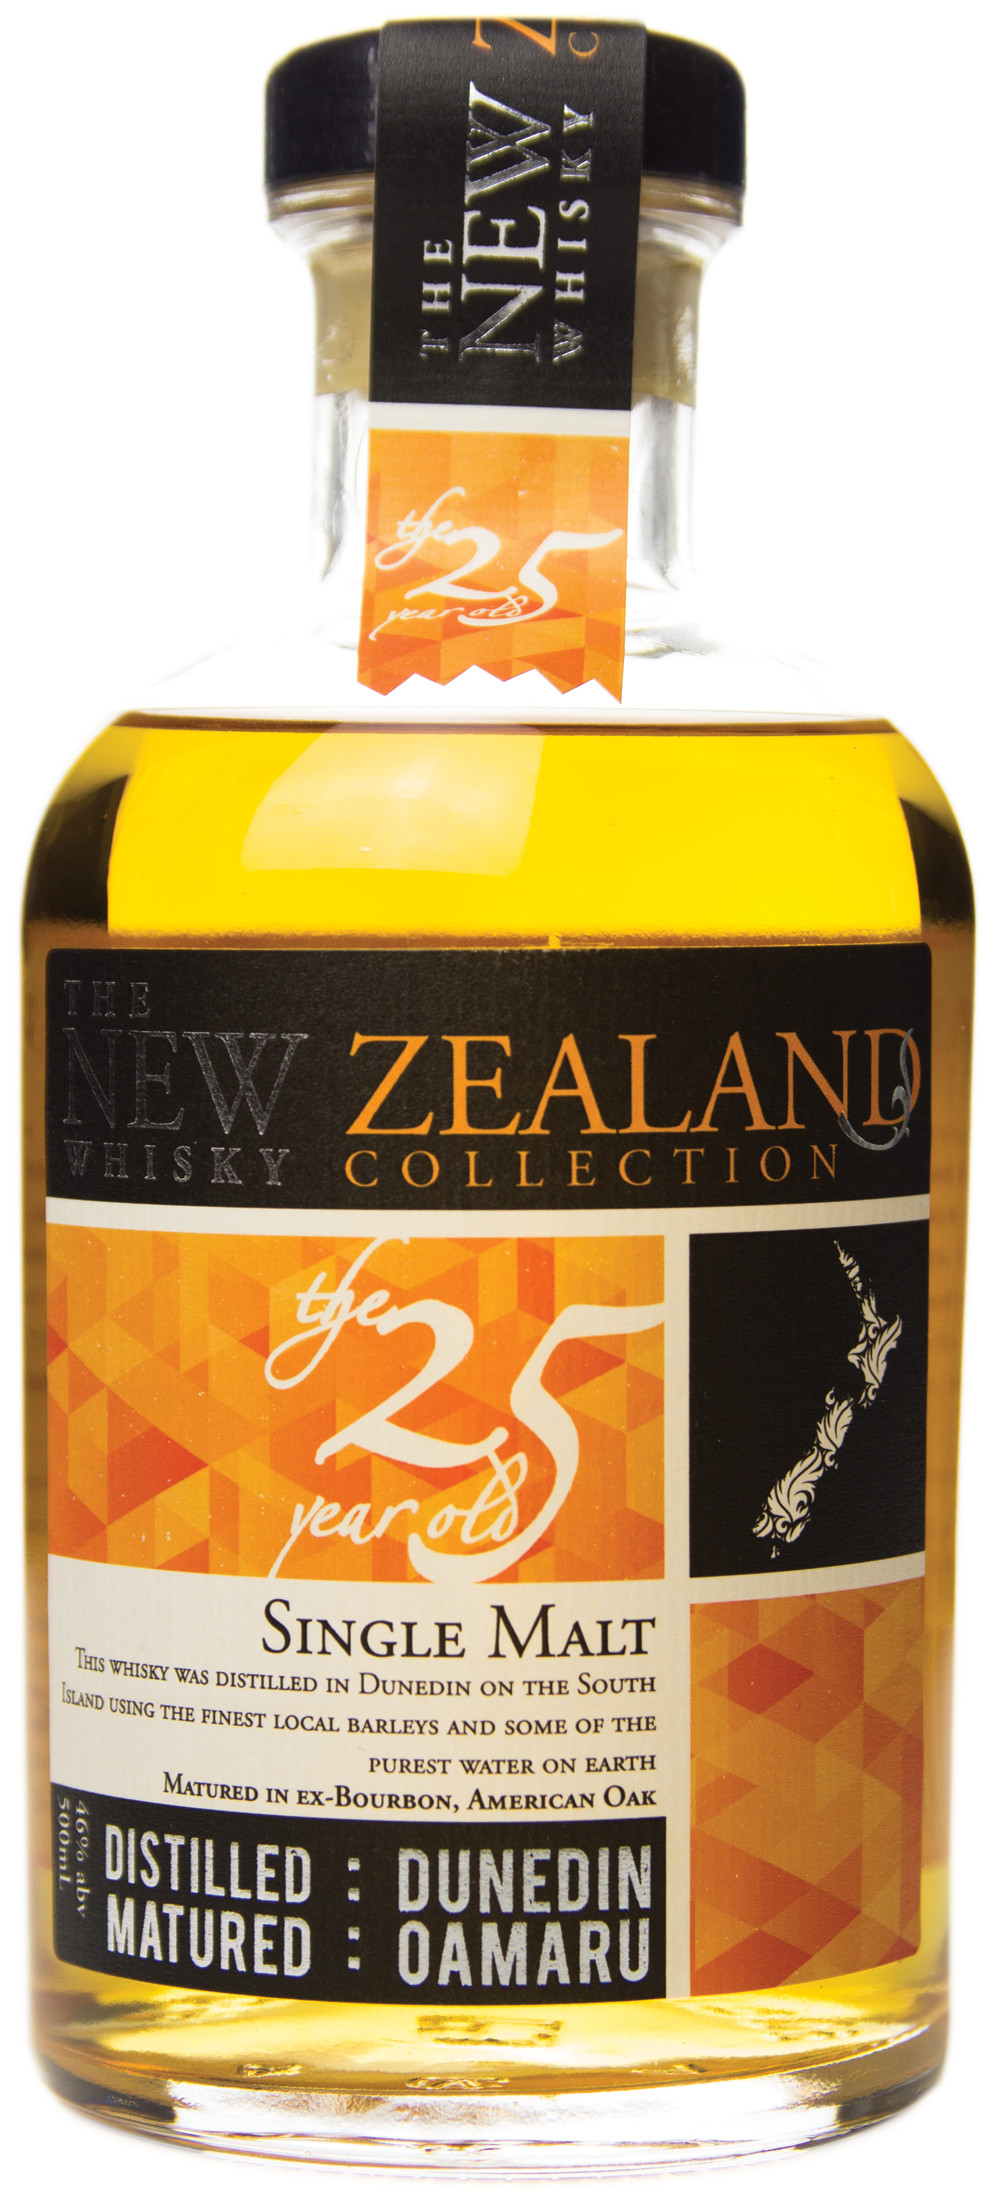 The New Zealand Whisky Collection 25 Year Old